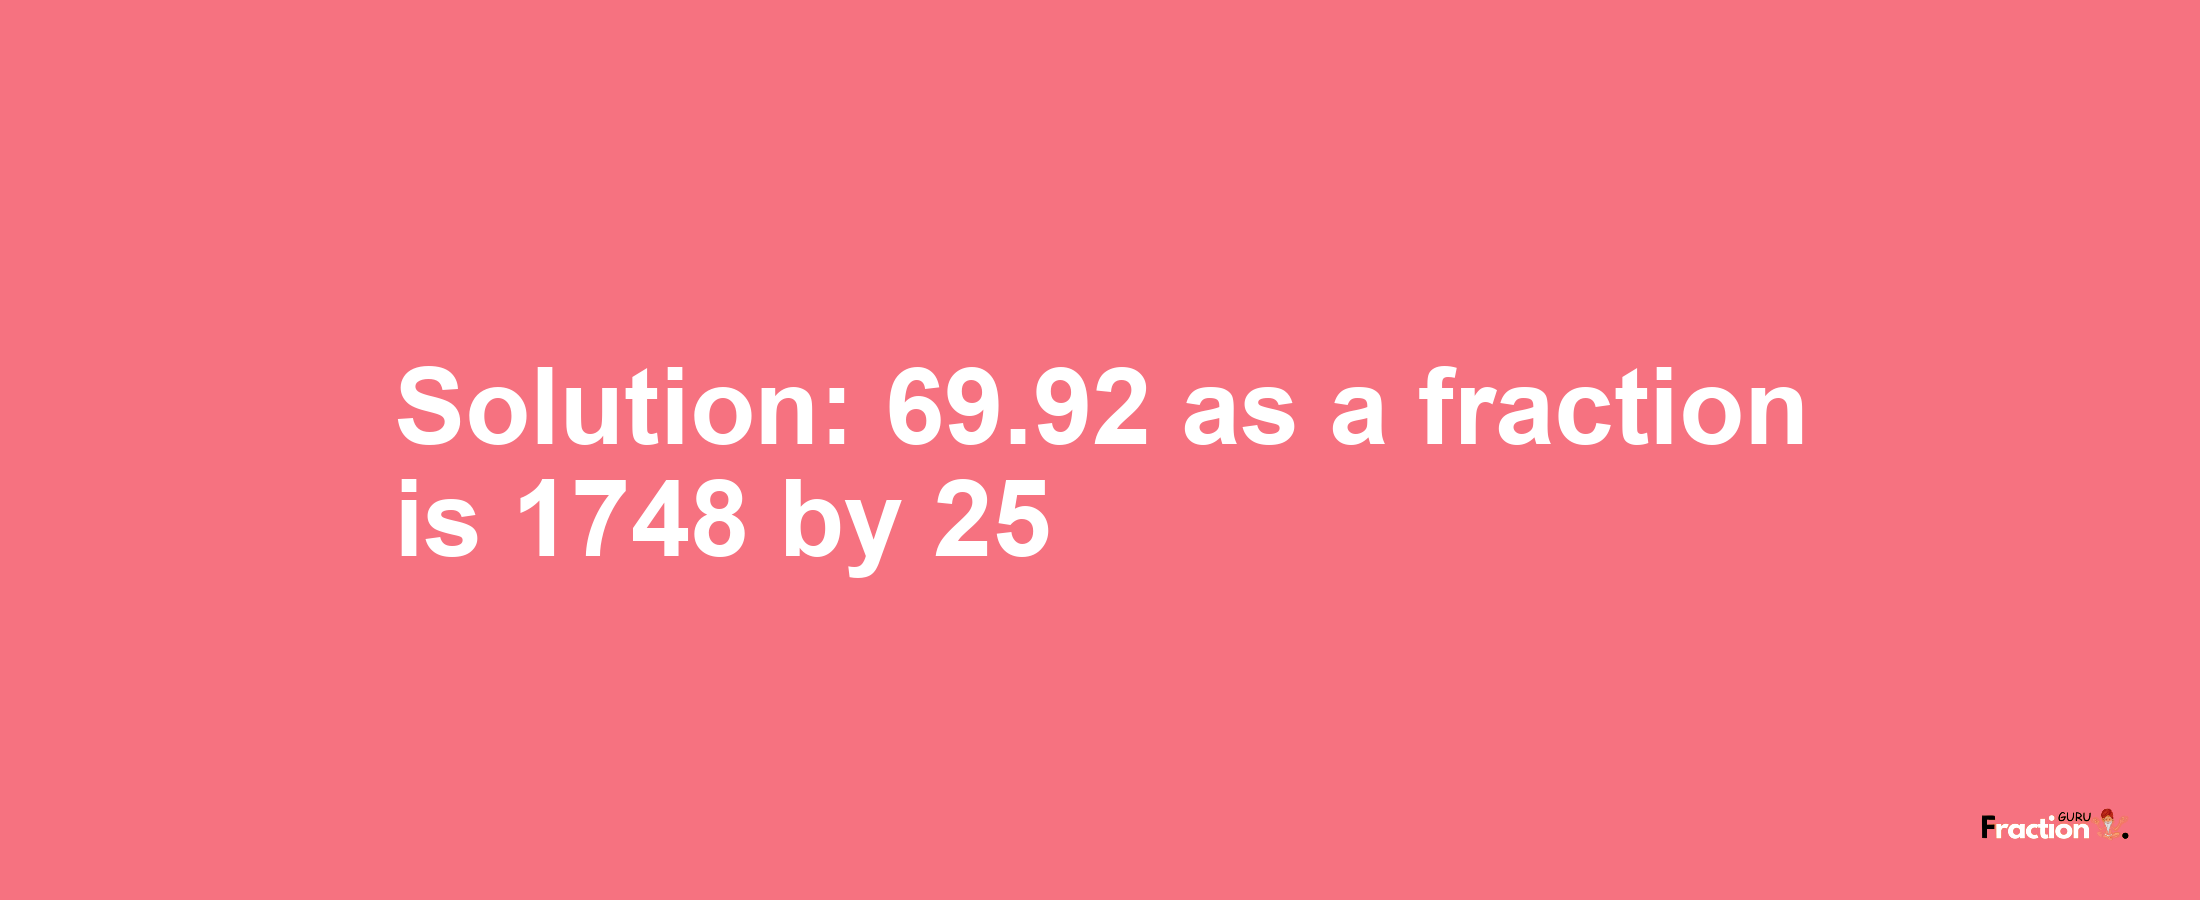 Solution:69.92 as a fraction is 1748/25